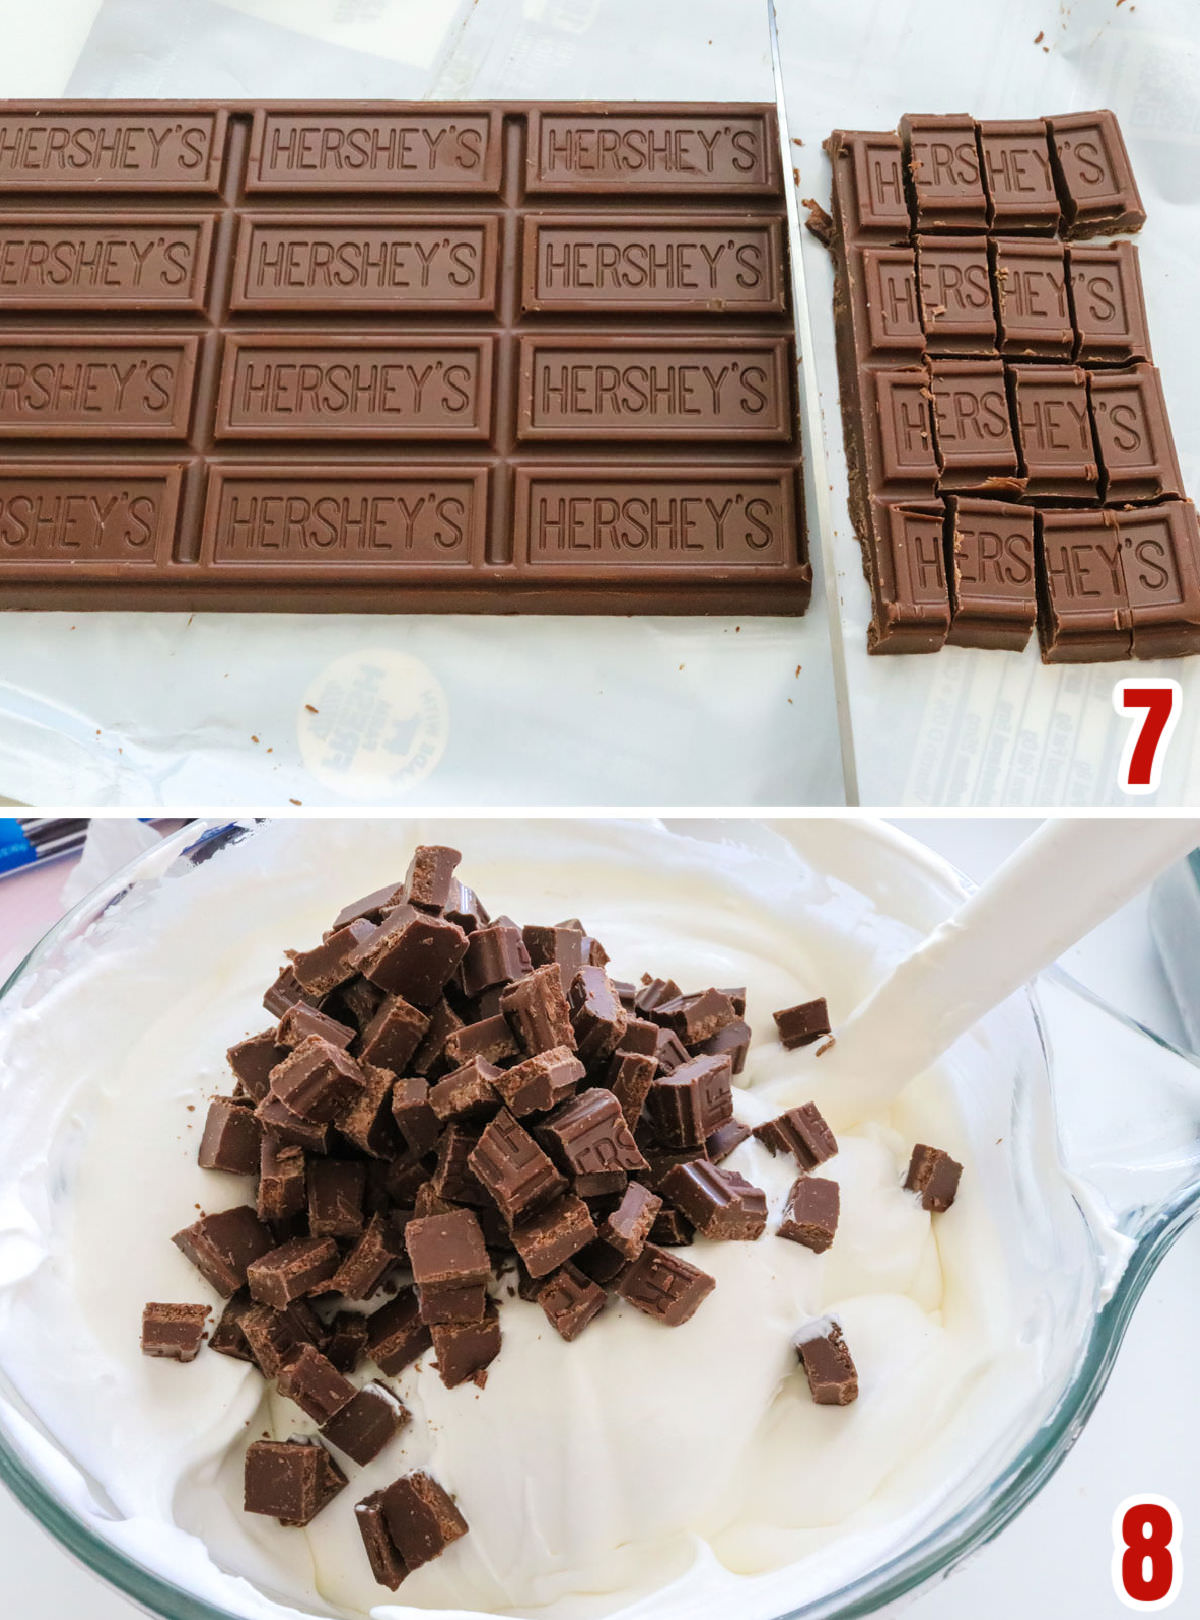 Collage image showing the steps for chopping up the Hershey's chocolate bars and adding the chunks to the marshmallow filling.